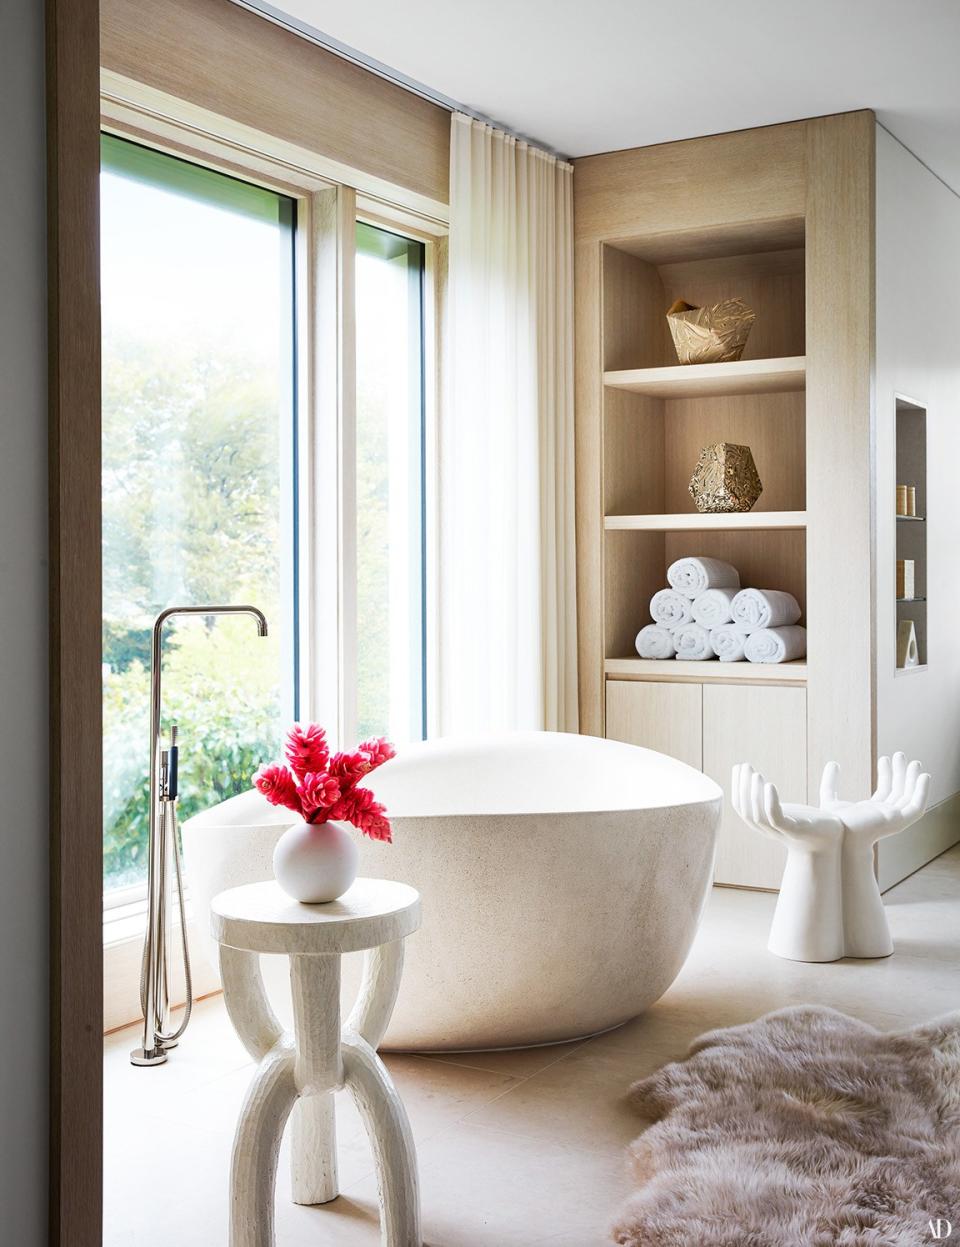 A chain stool by Clic (left) and hand stool by Studio A decorate the master bath. Tub filler by Vola; fur throw (on floor) from Roman and Williams Guild; vases (on shelves) by Cody Hoyt.